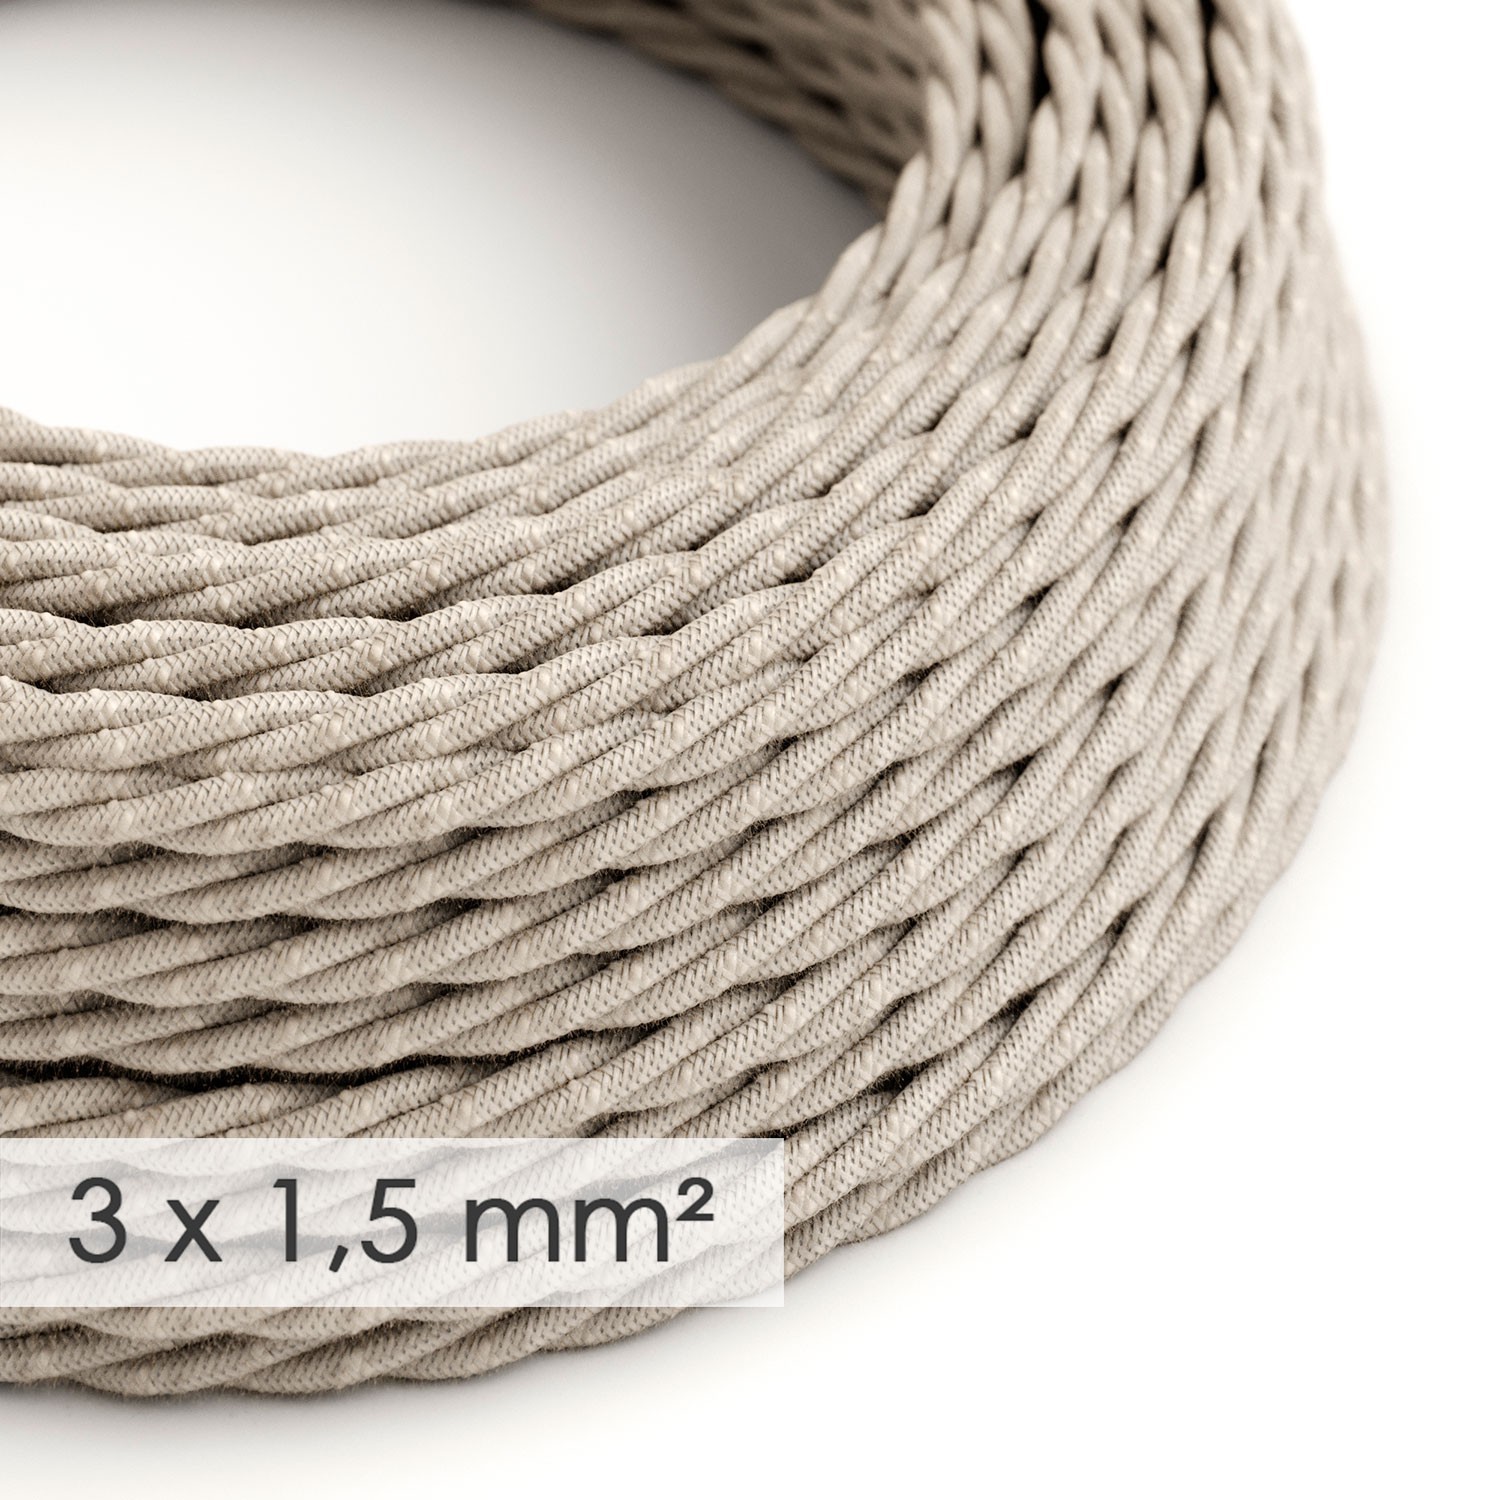 Large section electric cable 3x1,50 twisted - covered by Natural Neutral Linen TN01